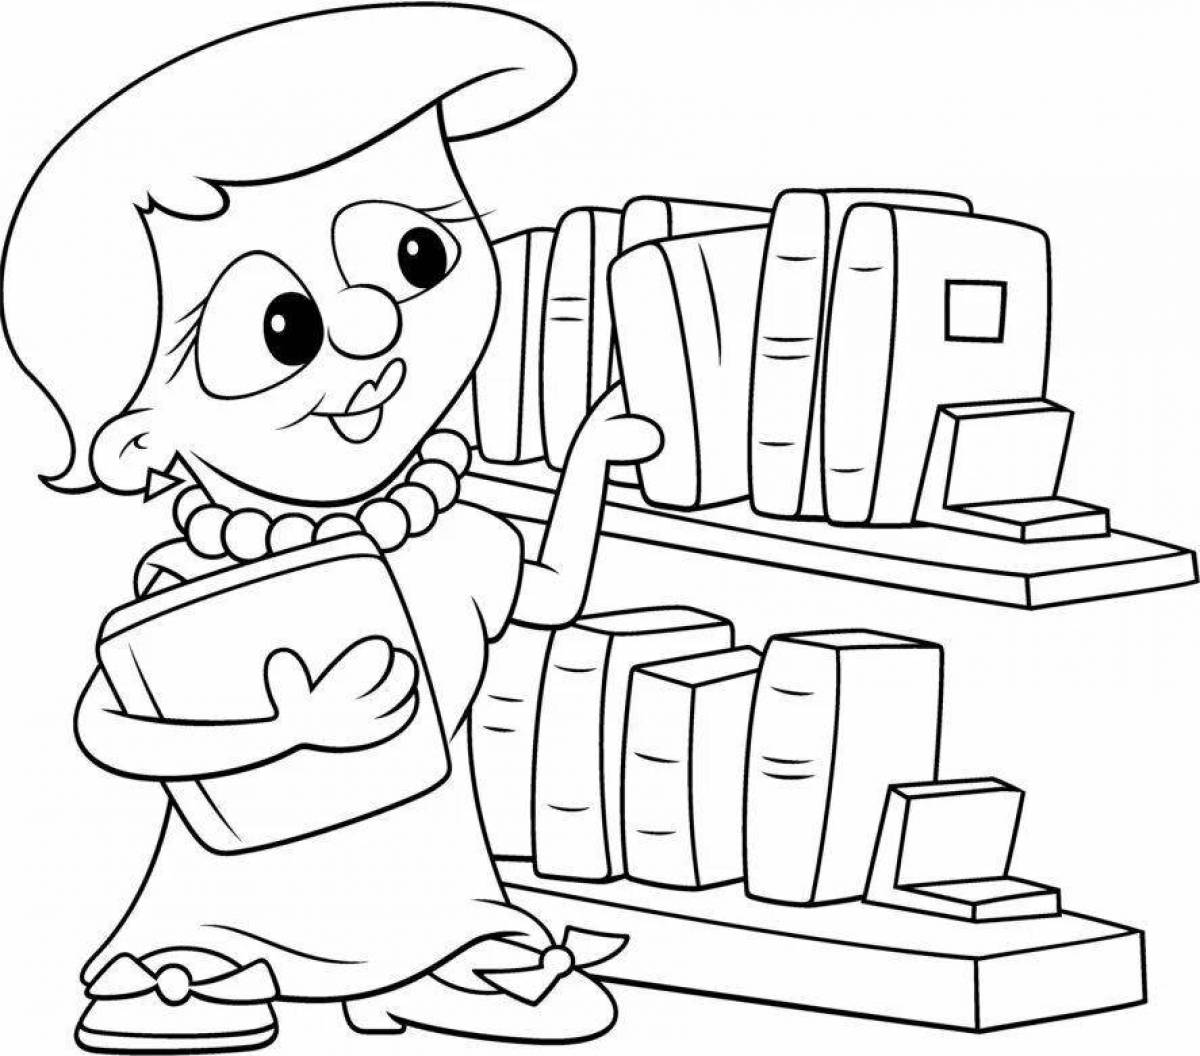 Color-blast library coloring page